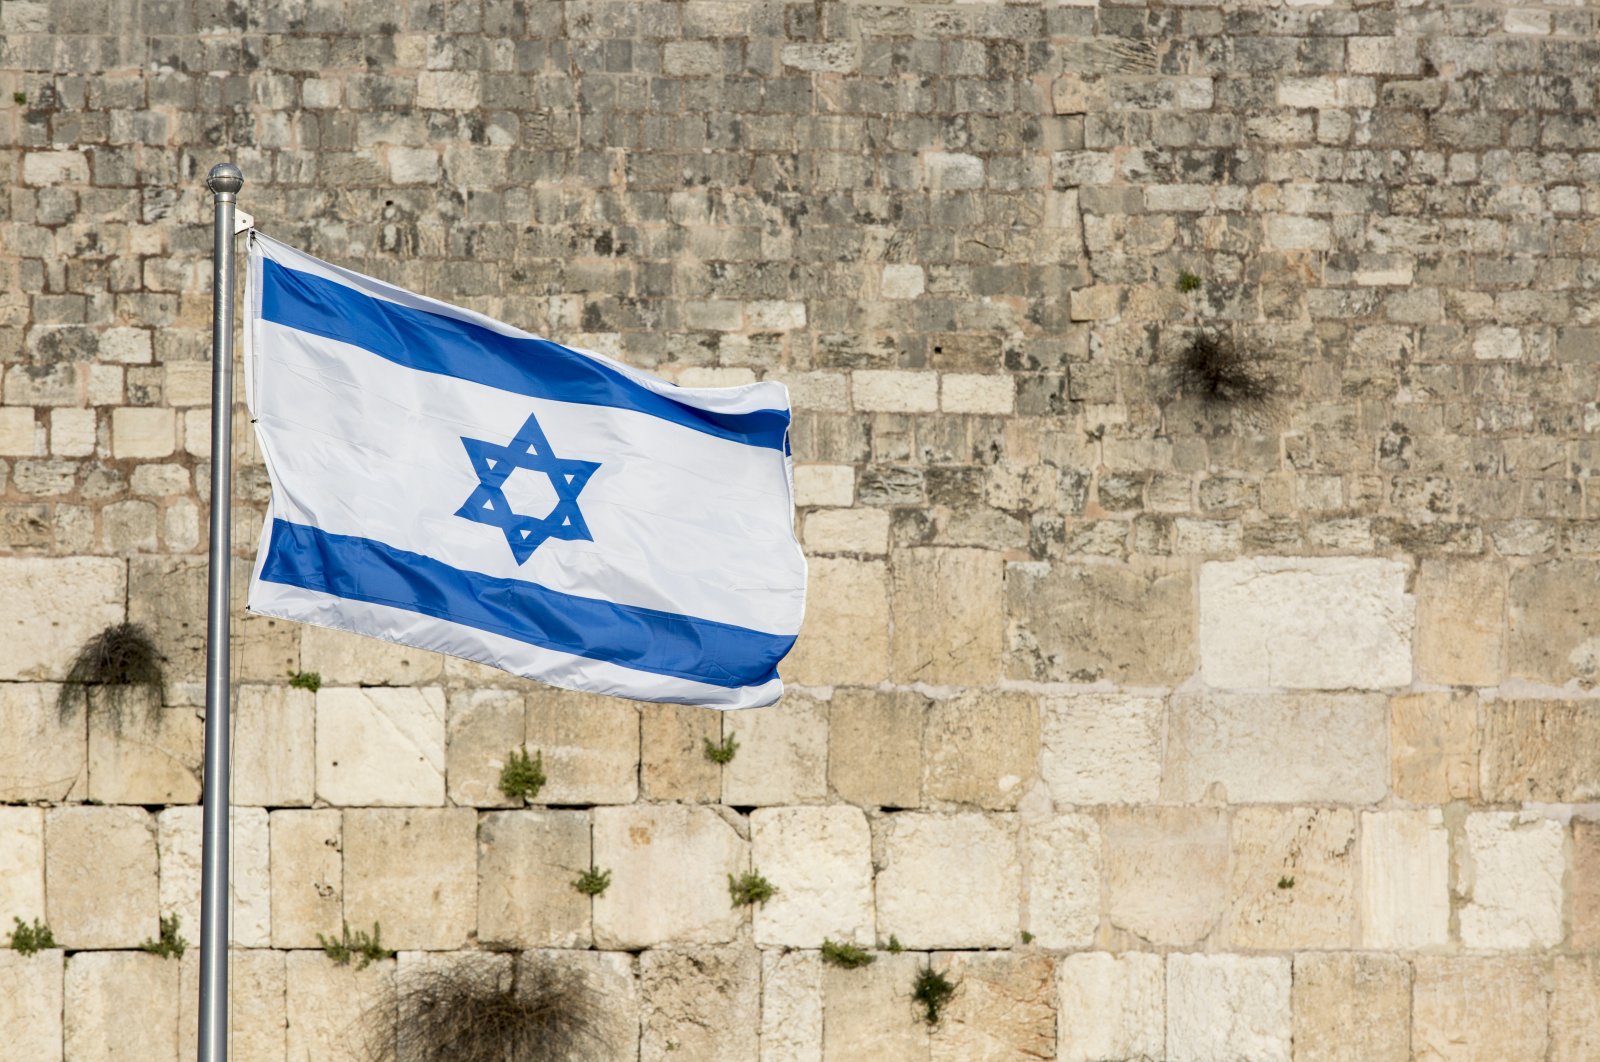 An Israeli flag flies over the Western Wall, in the Old City in East Jerusalem, occupied Palestine. (Getty Images)